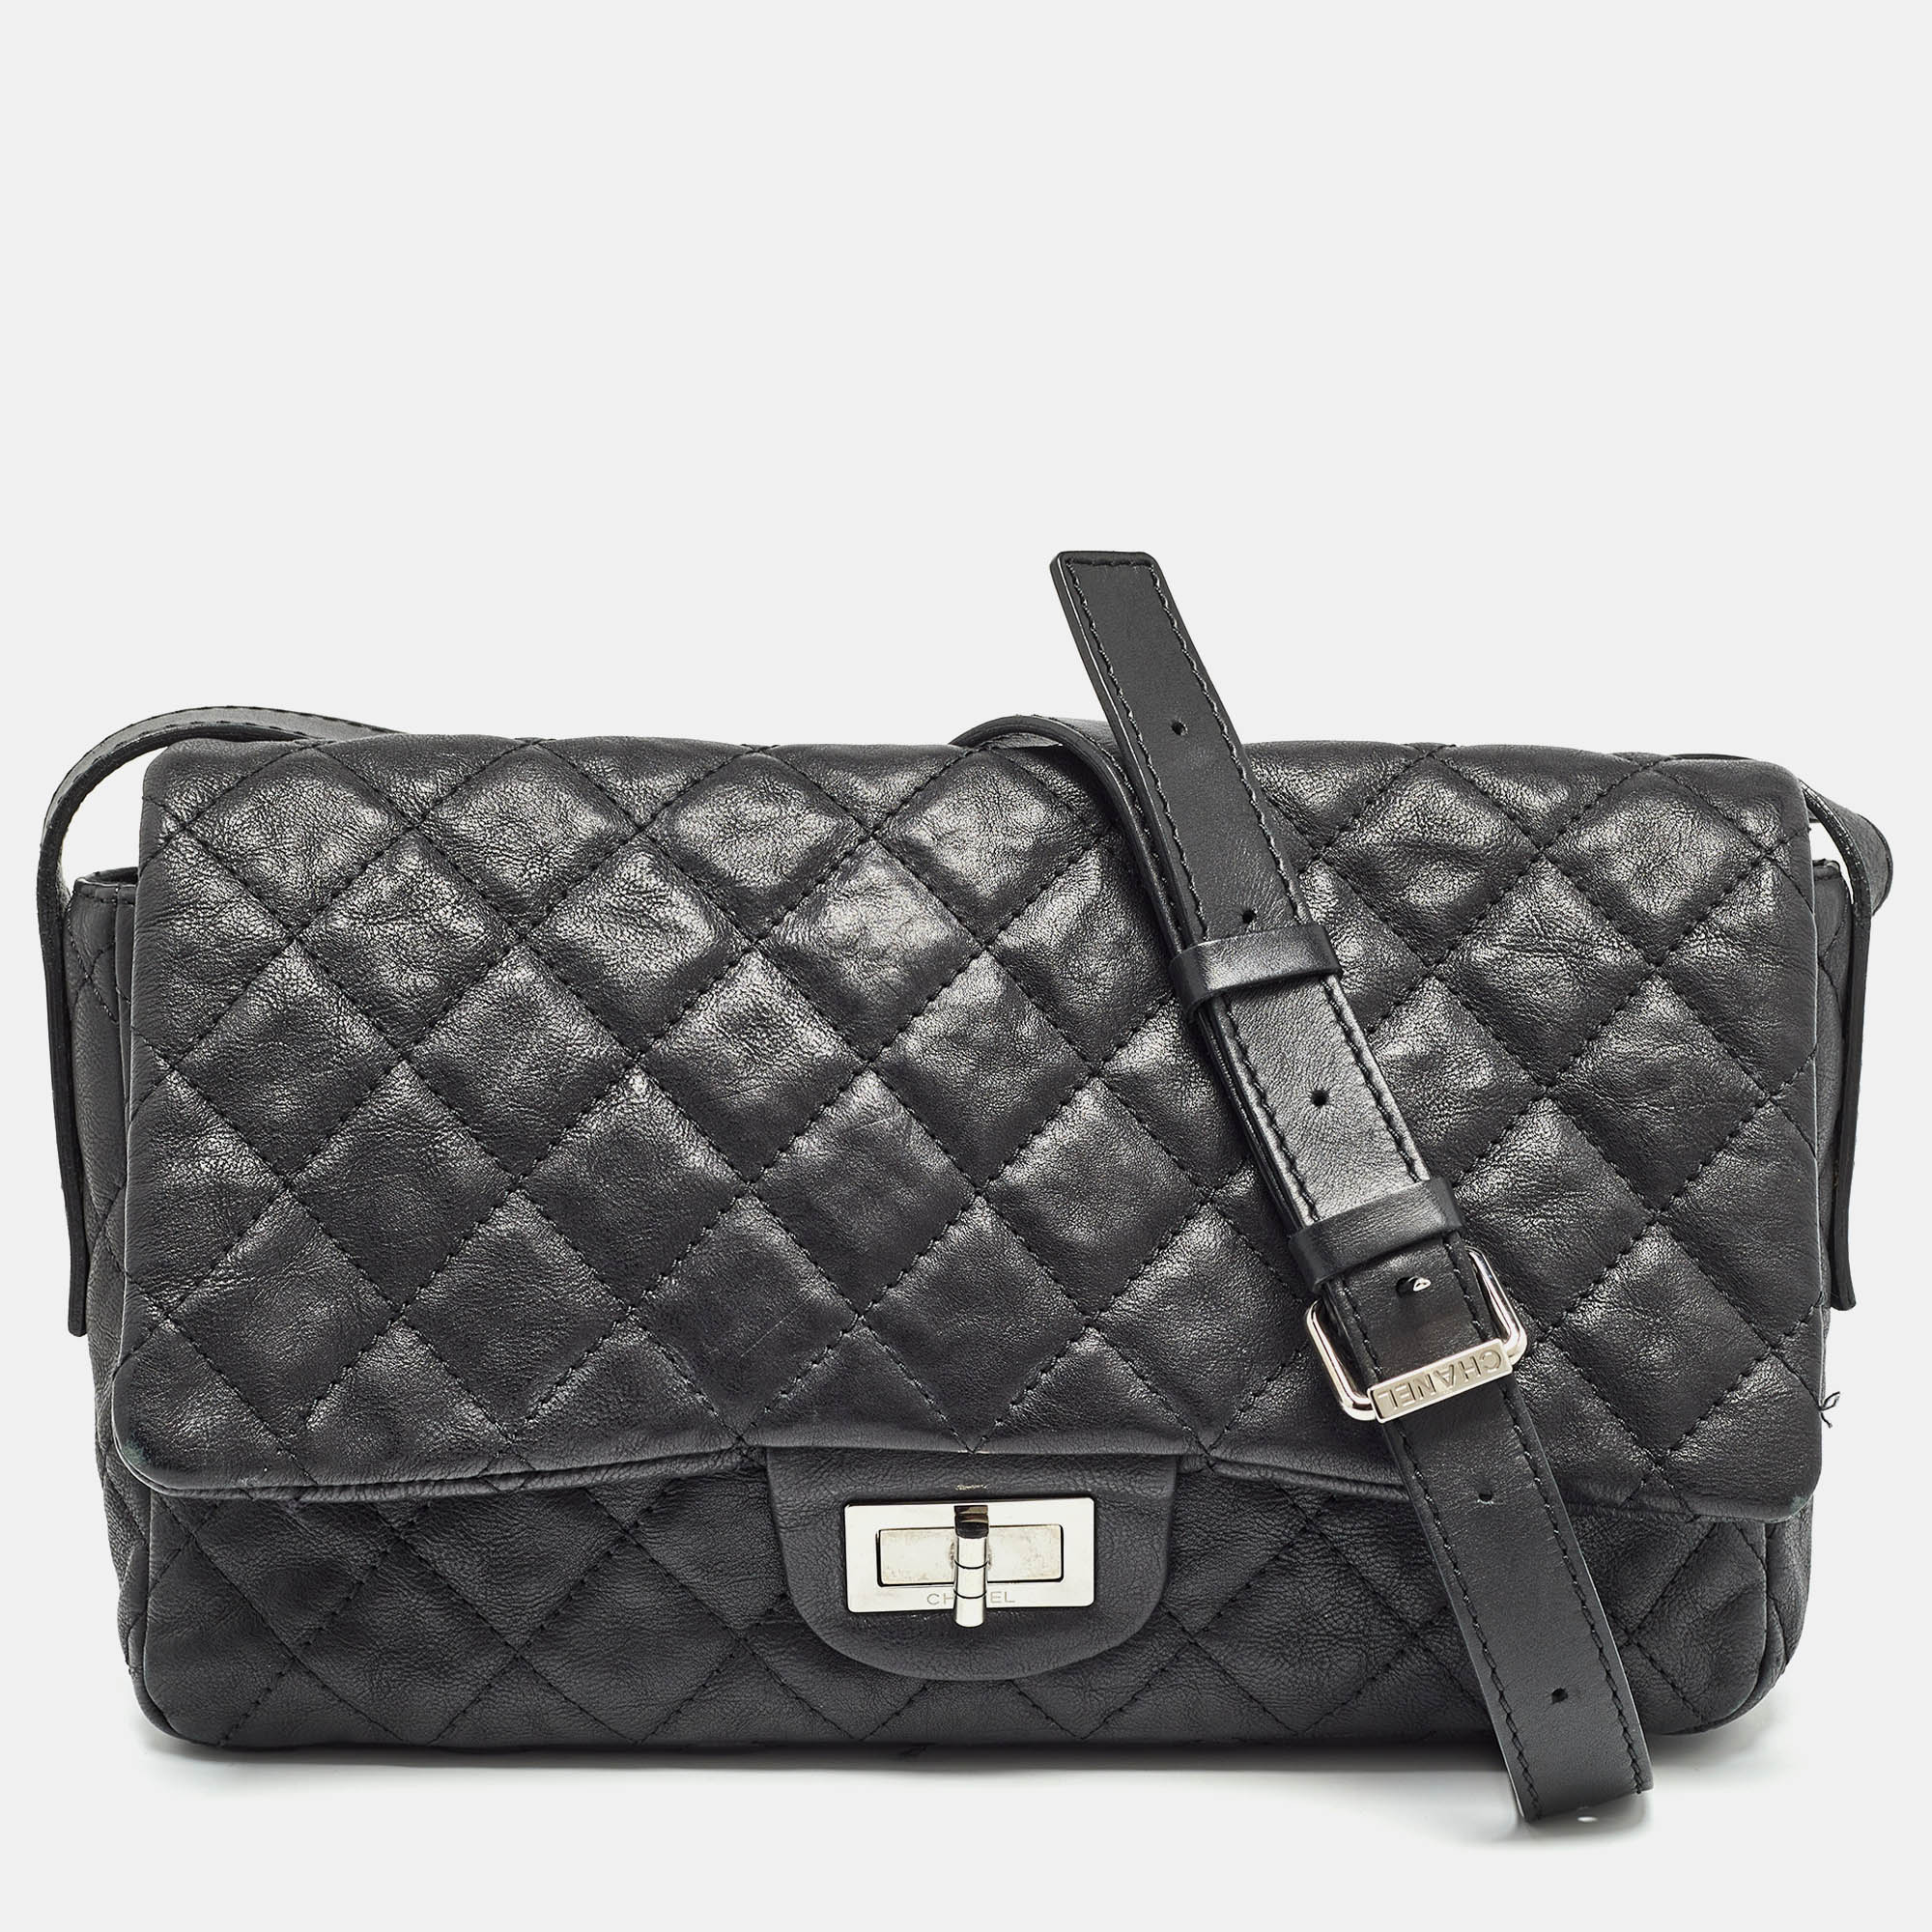 Chanel black quilted leather easy reissue messenger bag